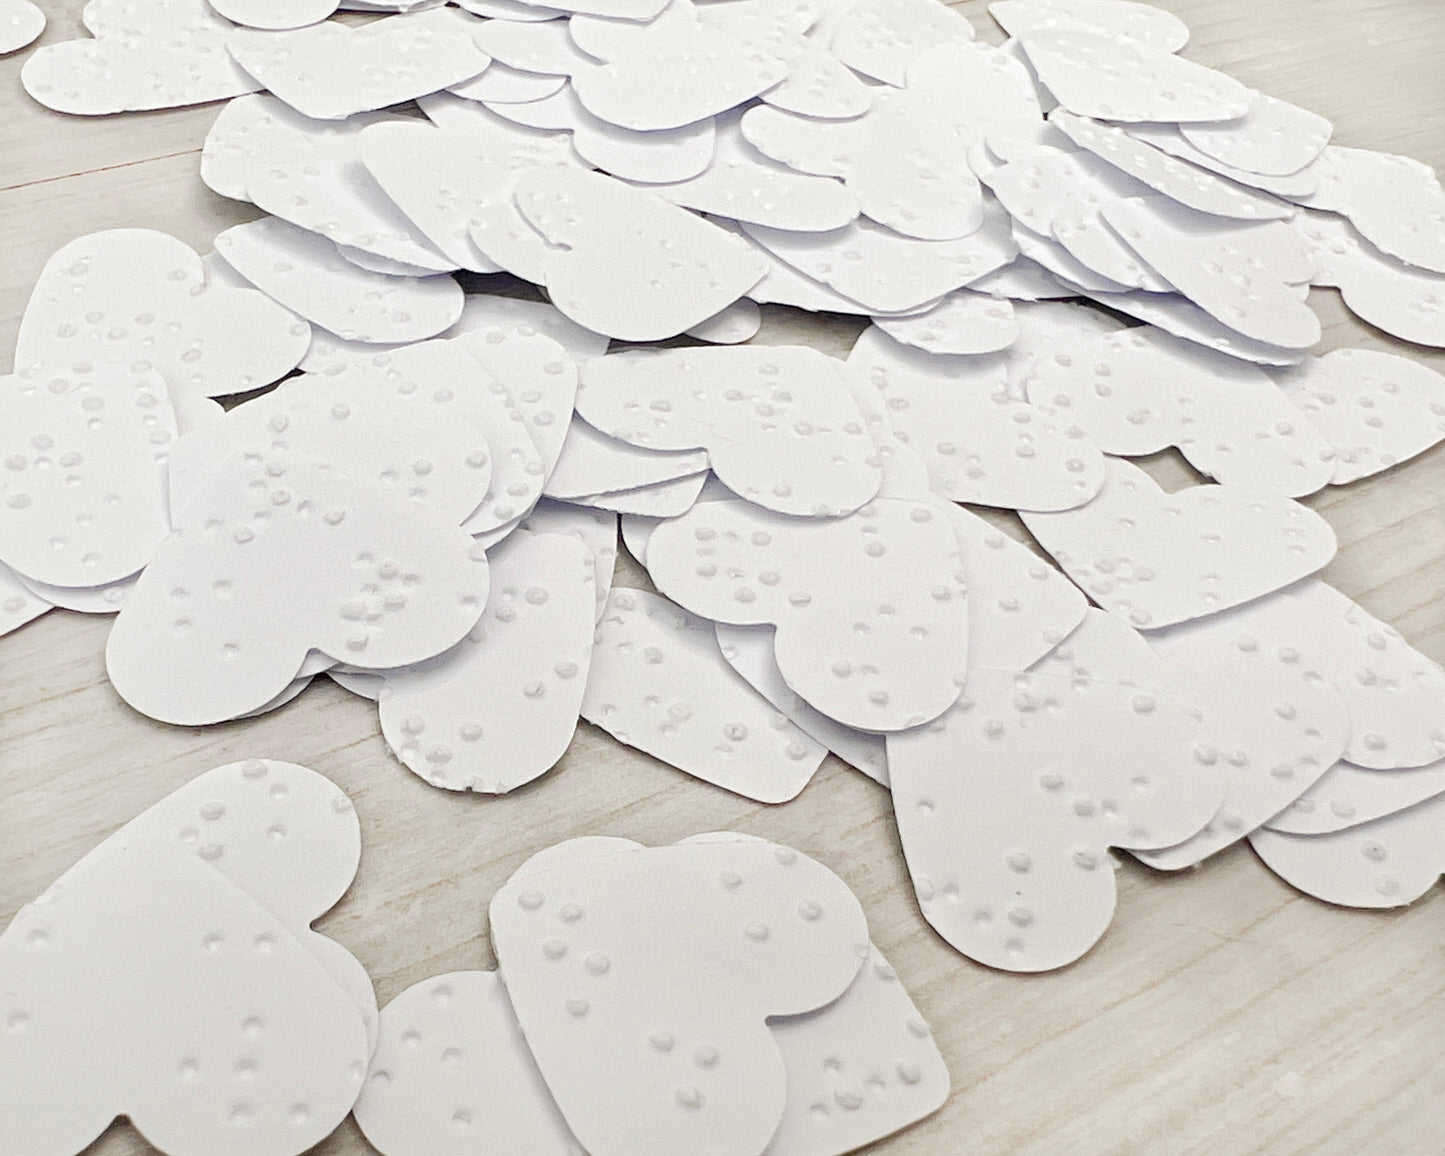 2.5cm hearts cut from white braille paper.